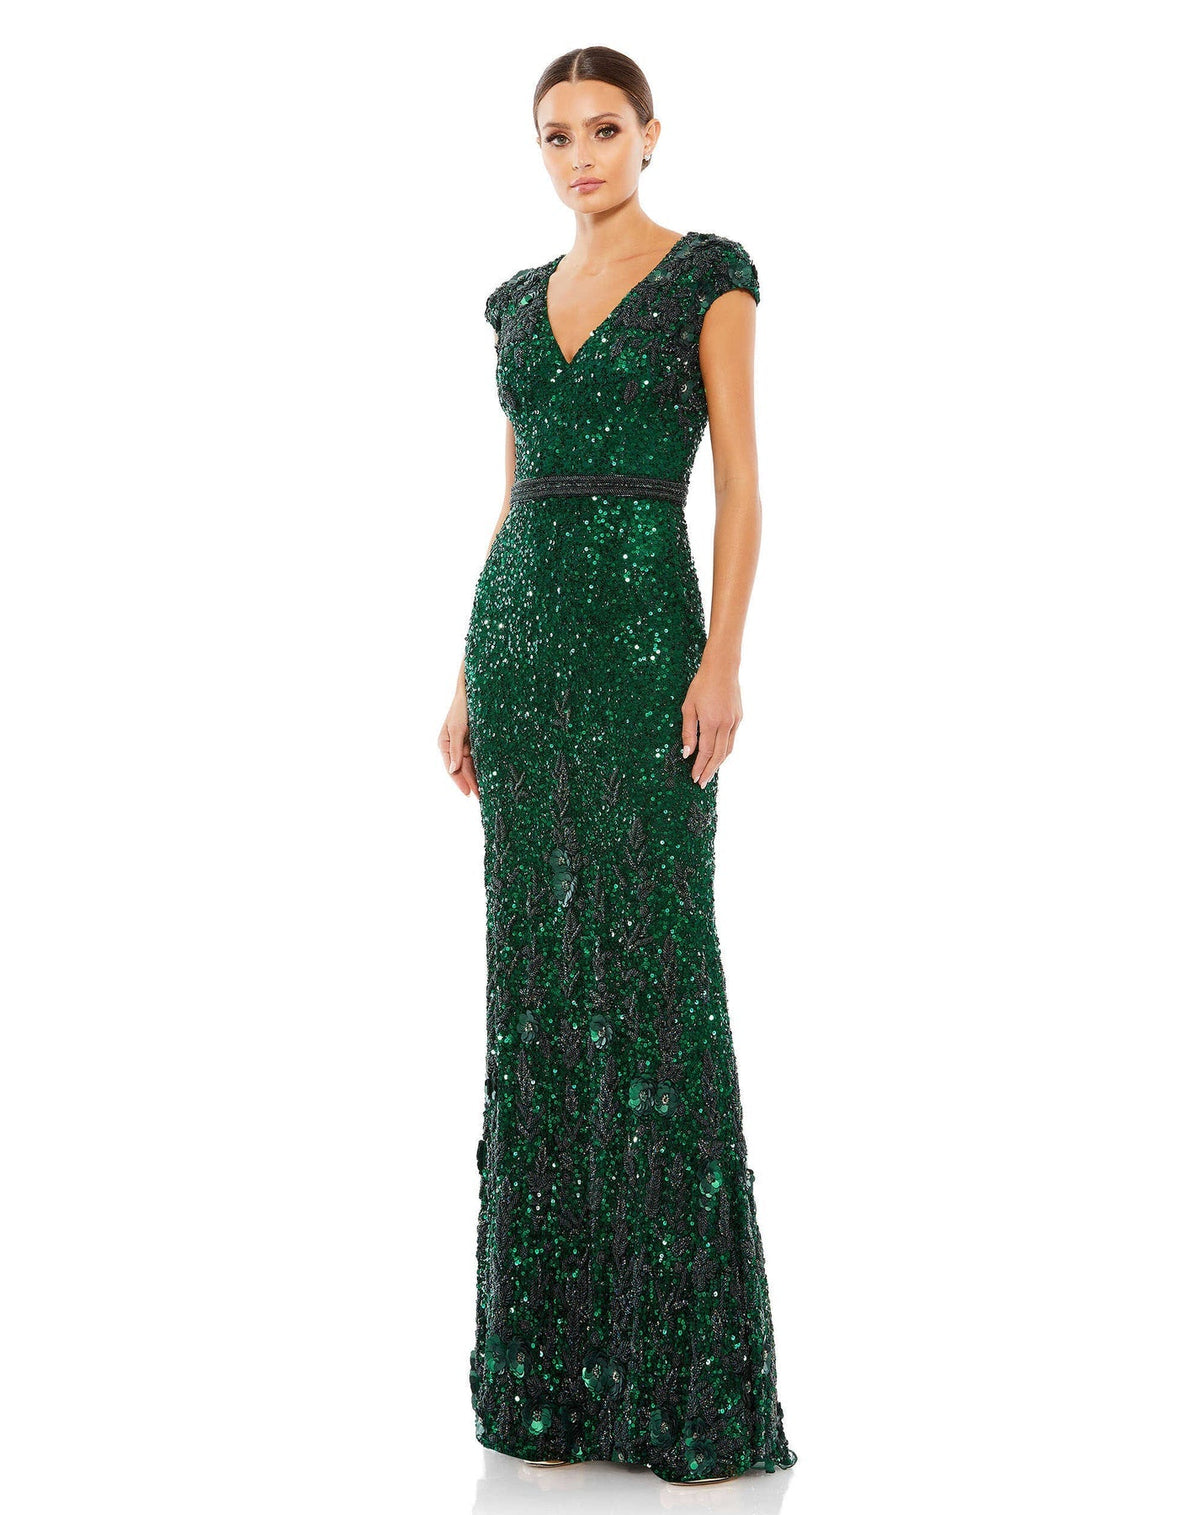 Mac Duggal Style #5055 Embellished V-Neck cap sleeve sequin gown - Green front view